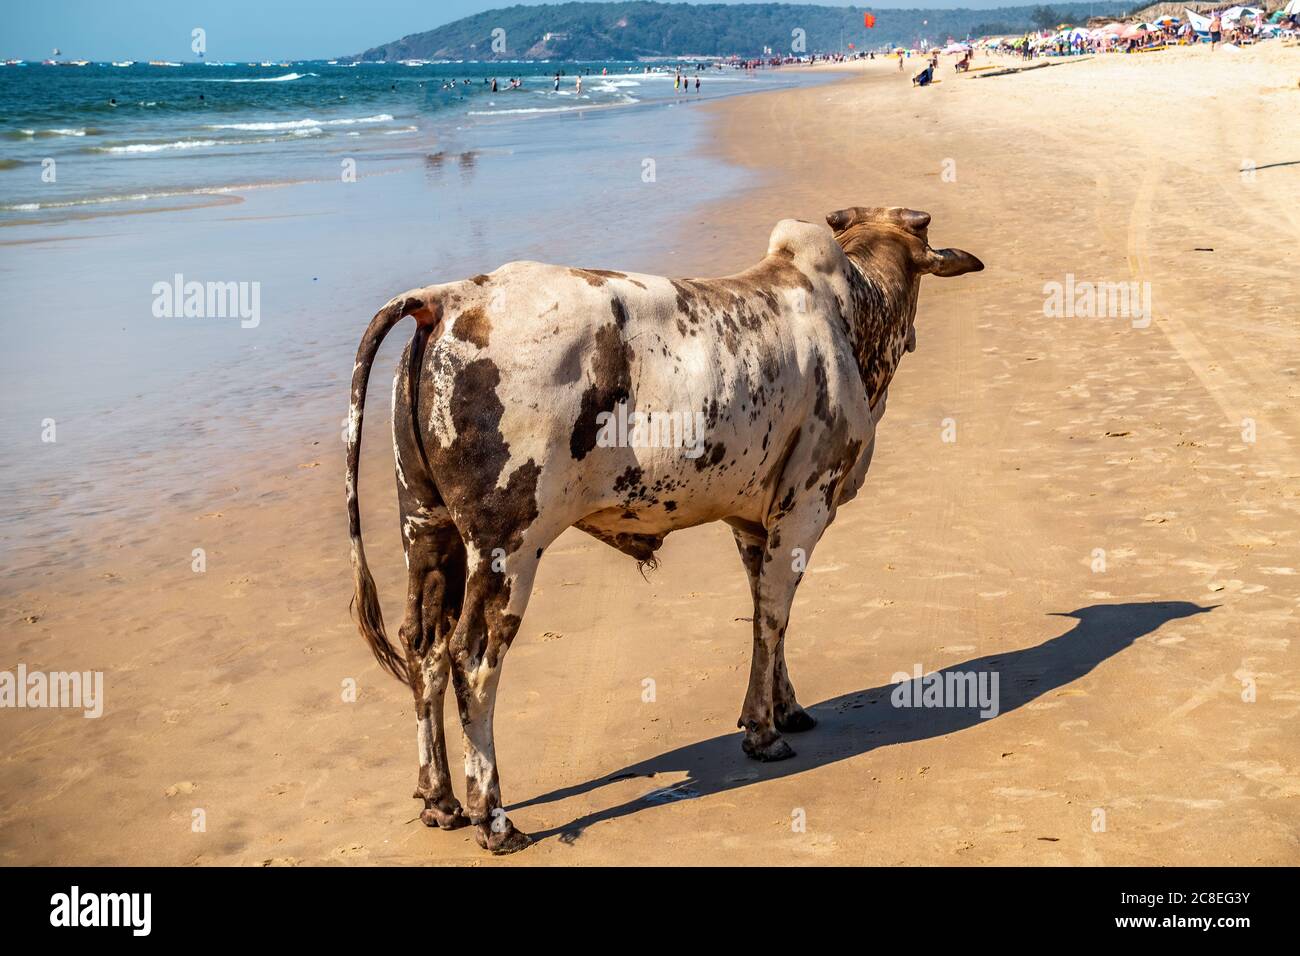 CALANGUTE, GOA, INDIA JANUARY 2, 2019: Typical indian holy cow watches at tourists on biggest beach in GOA province. Sunny day, calm sea, blue skies. Stock Photo